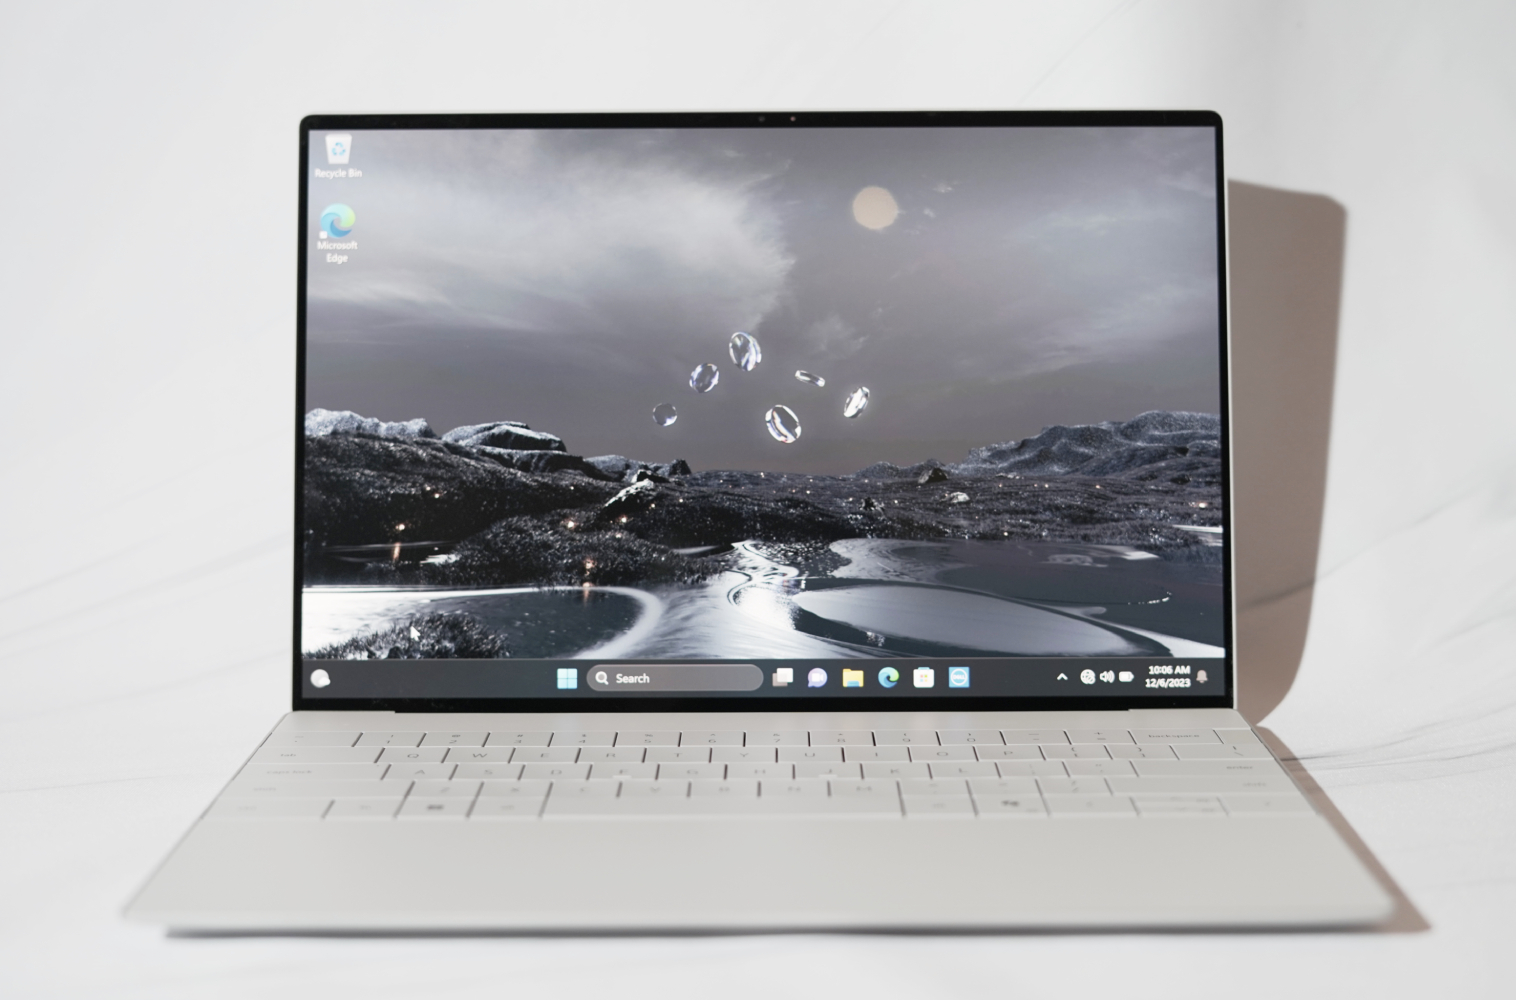 The display of the Dell XPS 13 on a white backdrop.